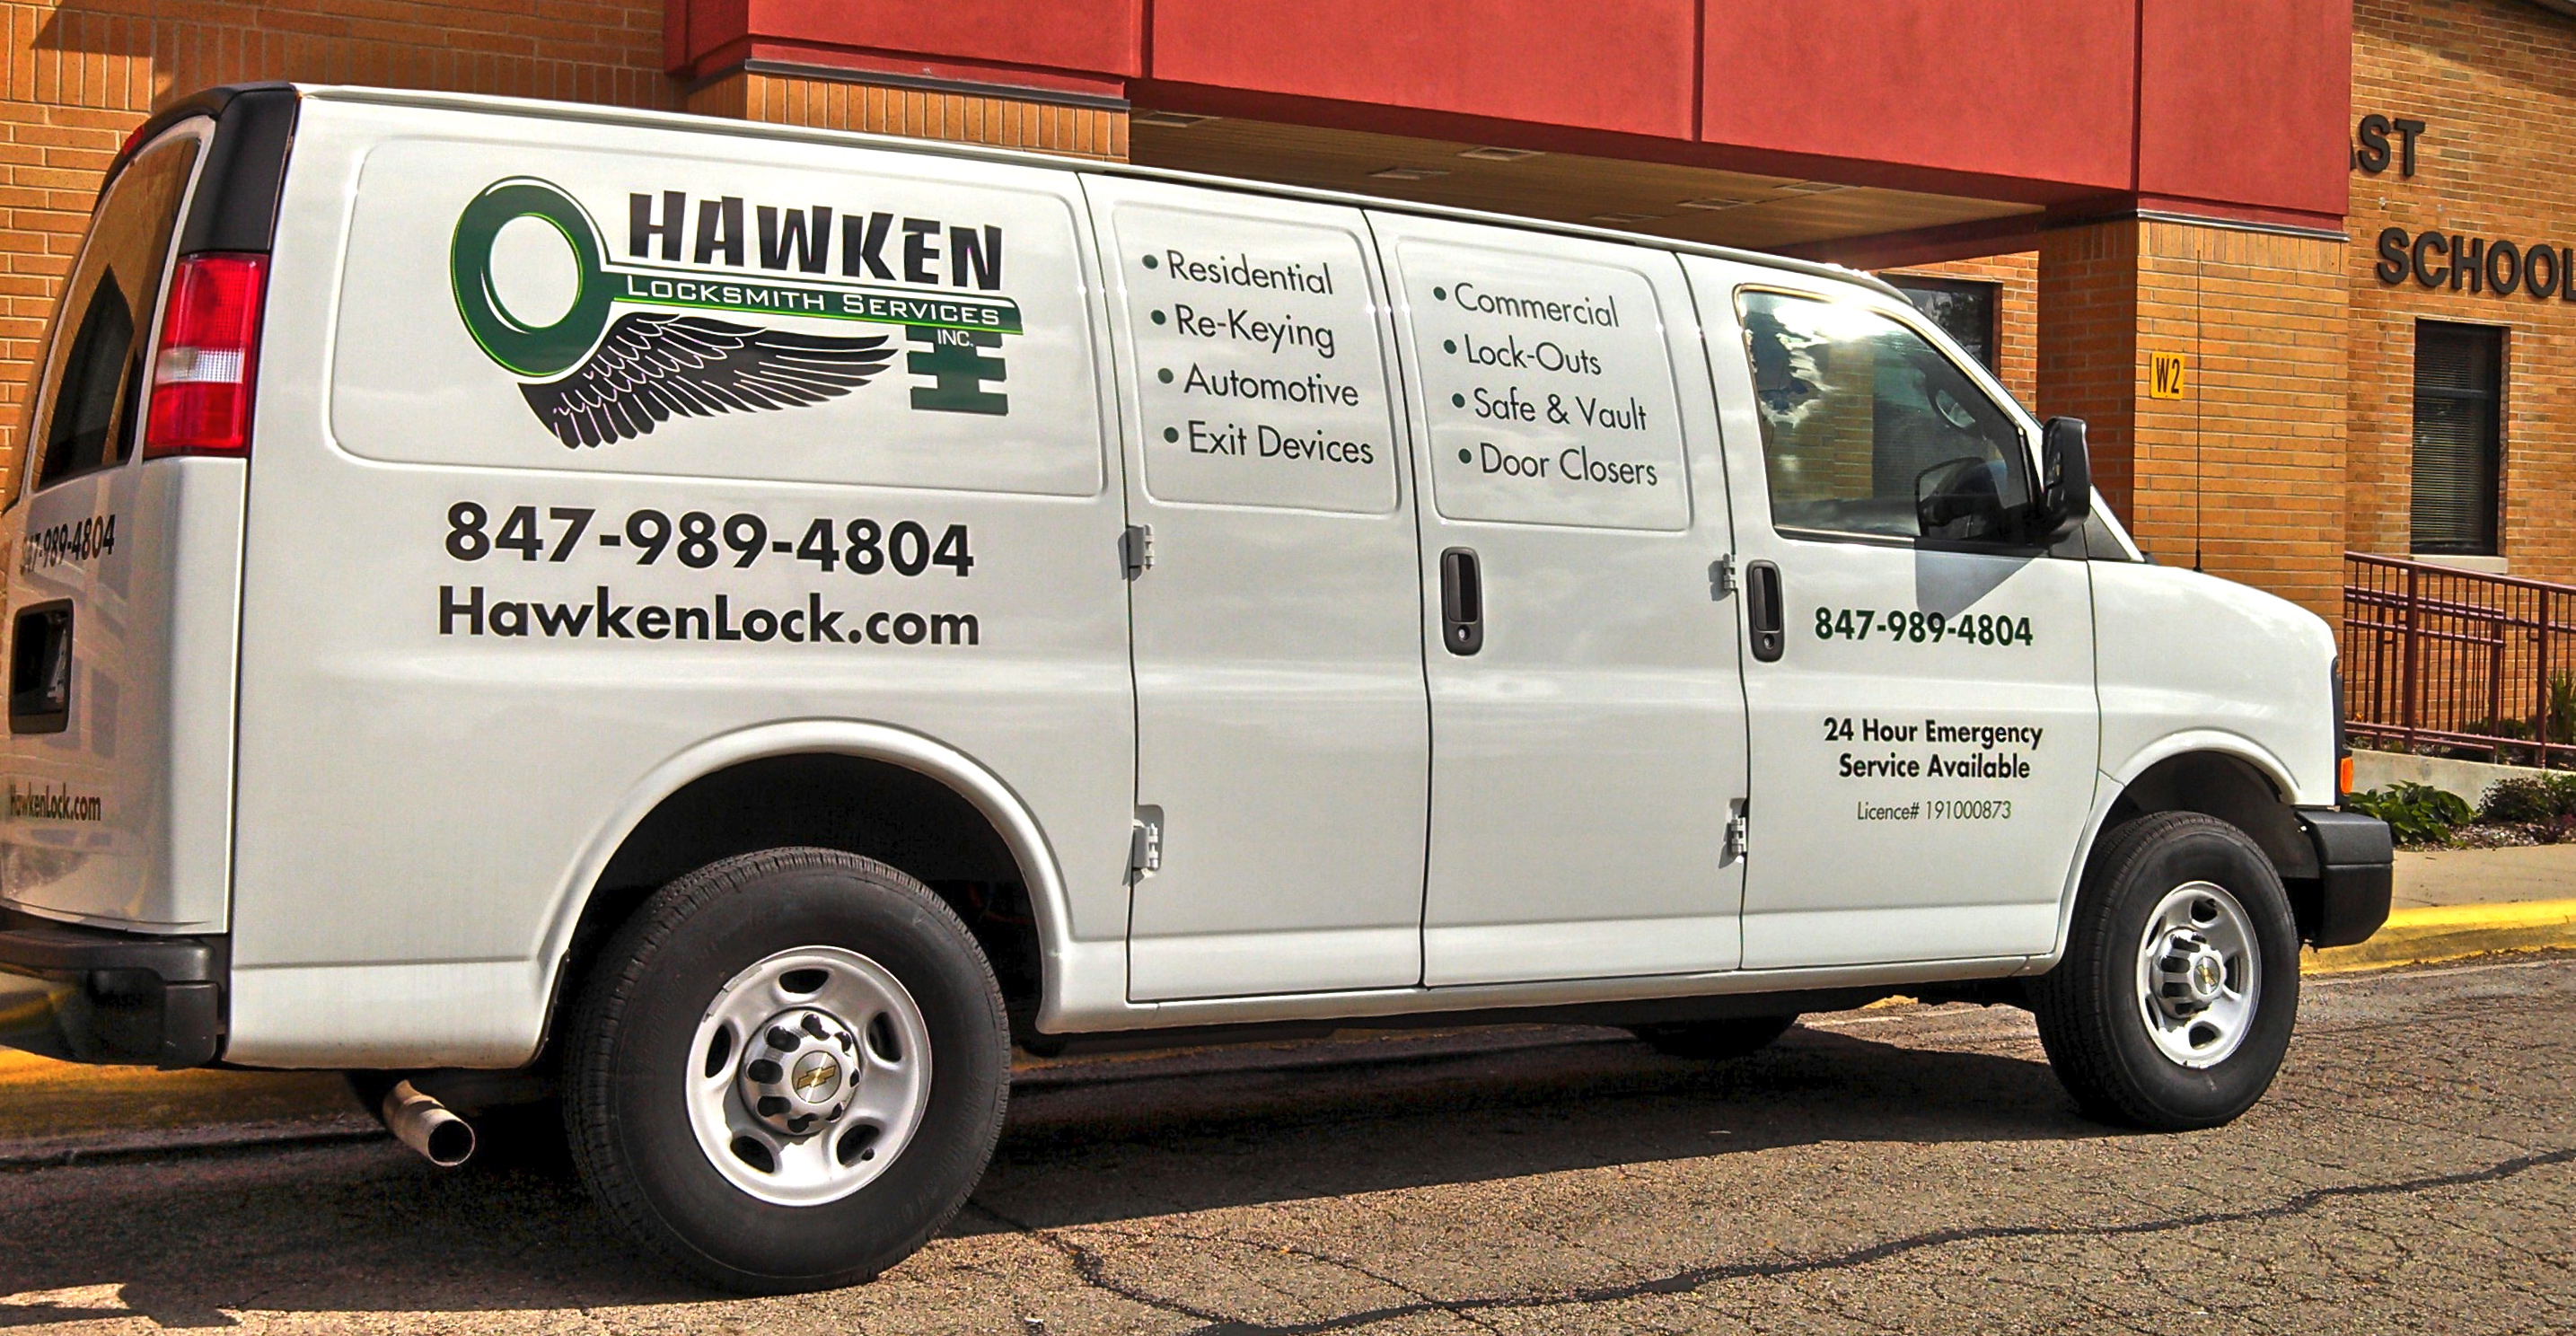 24 hour mobile locksmith near me in South Elgin, IL